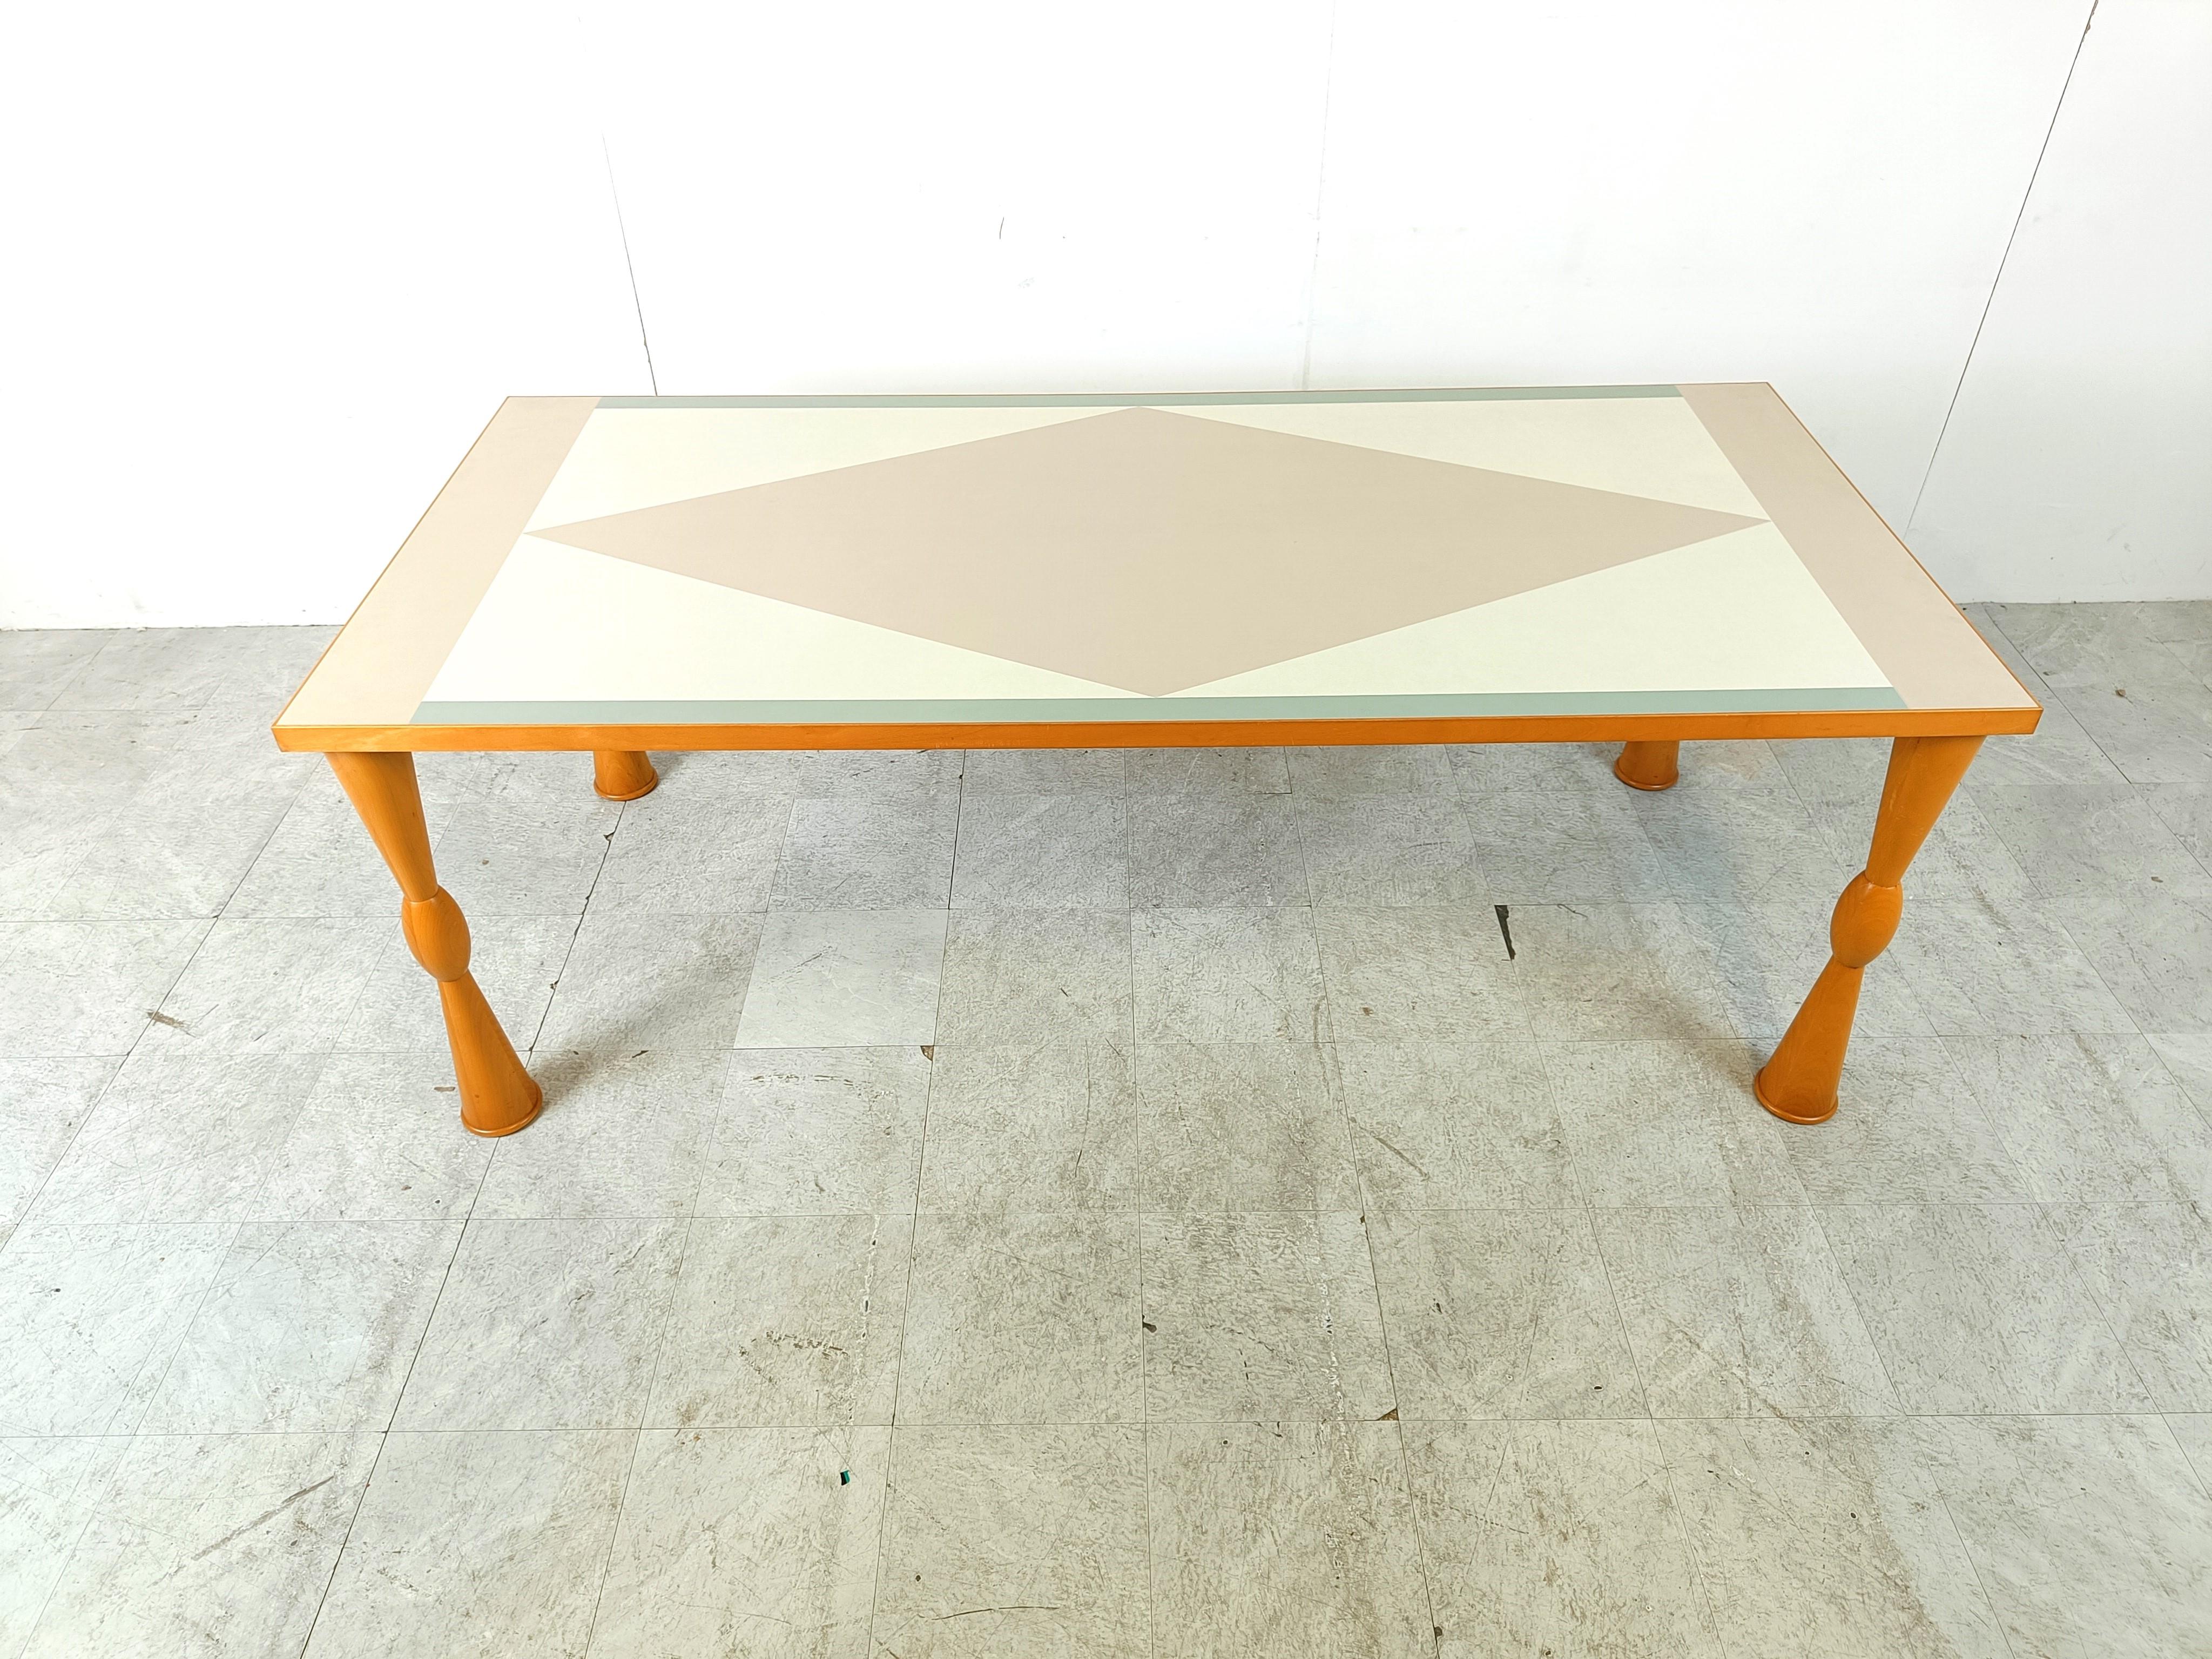 Postmodern dining table designed by Ettore Sottsass for Zanotta Italy.

Attractive and payful 'memphis' design.

Made of beech wood and a laminated geometrical table top.

1990s - italy

Legs can be rmeoved for shipping.

Height: 74cm/29.13